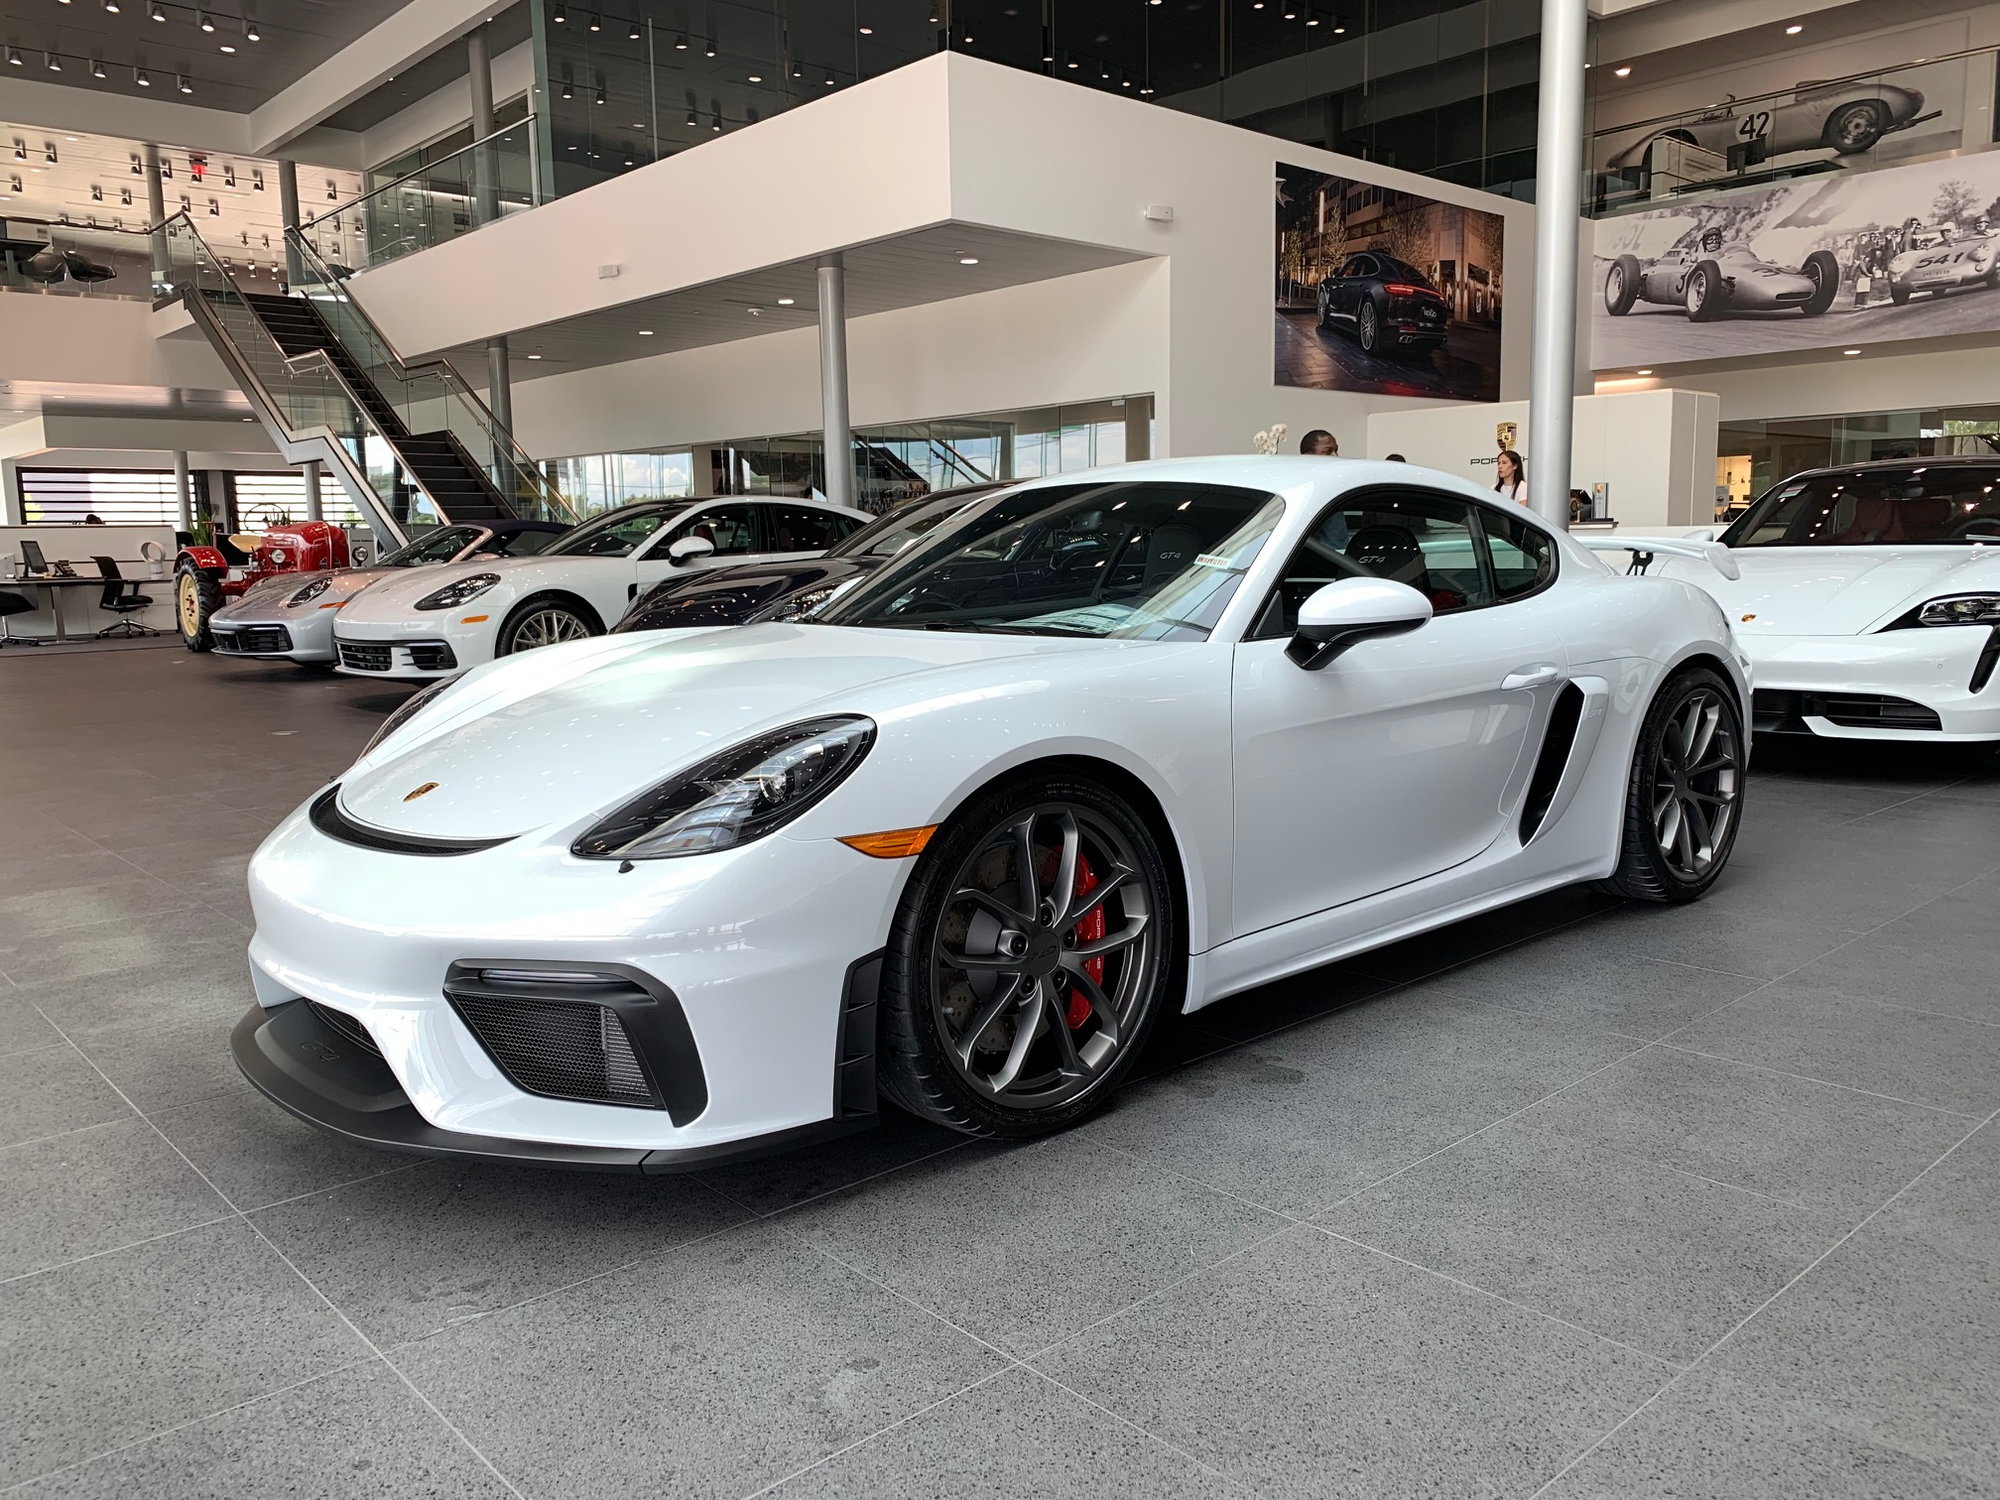 2020 Porsche 718 Cayman - Available Cayman GT4 at MSRP - New - VIN WP0AC2A87LK289270 - 20 Miles - 6 cyl - 2WD - Manual - Coupe - White - Houston, TX 77090, United States